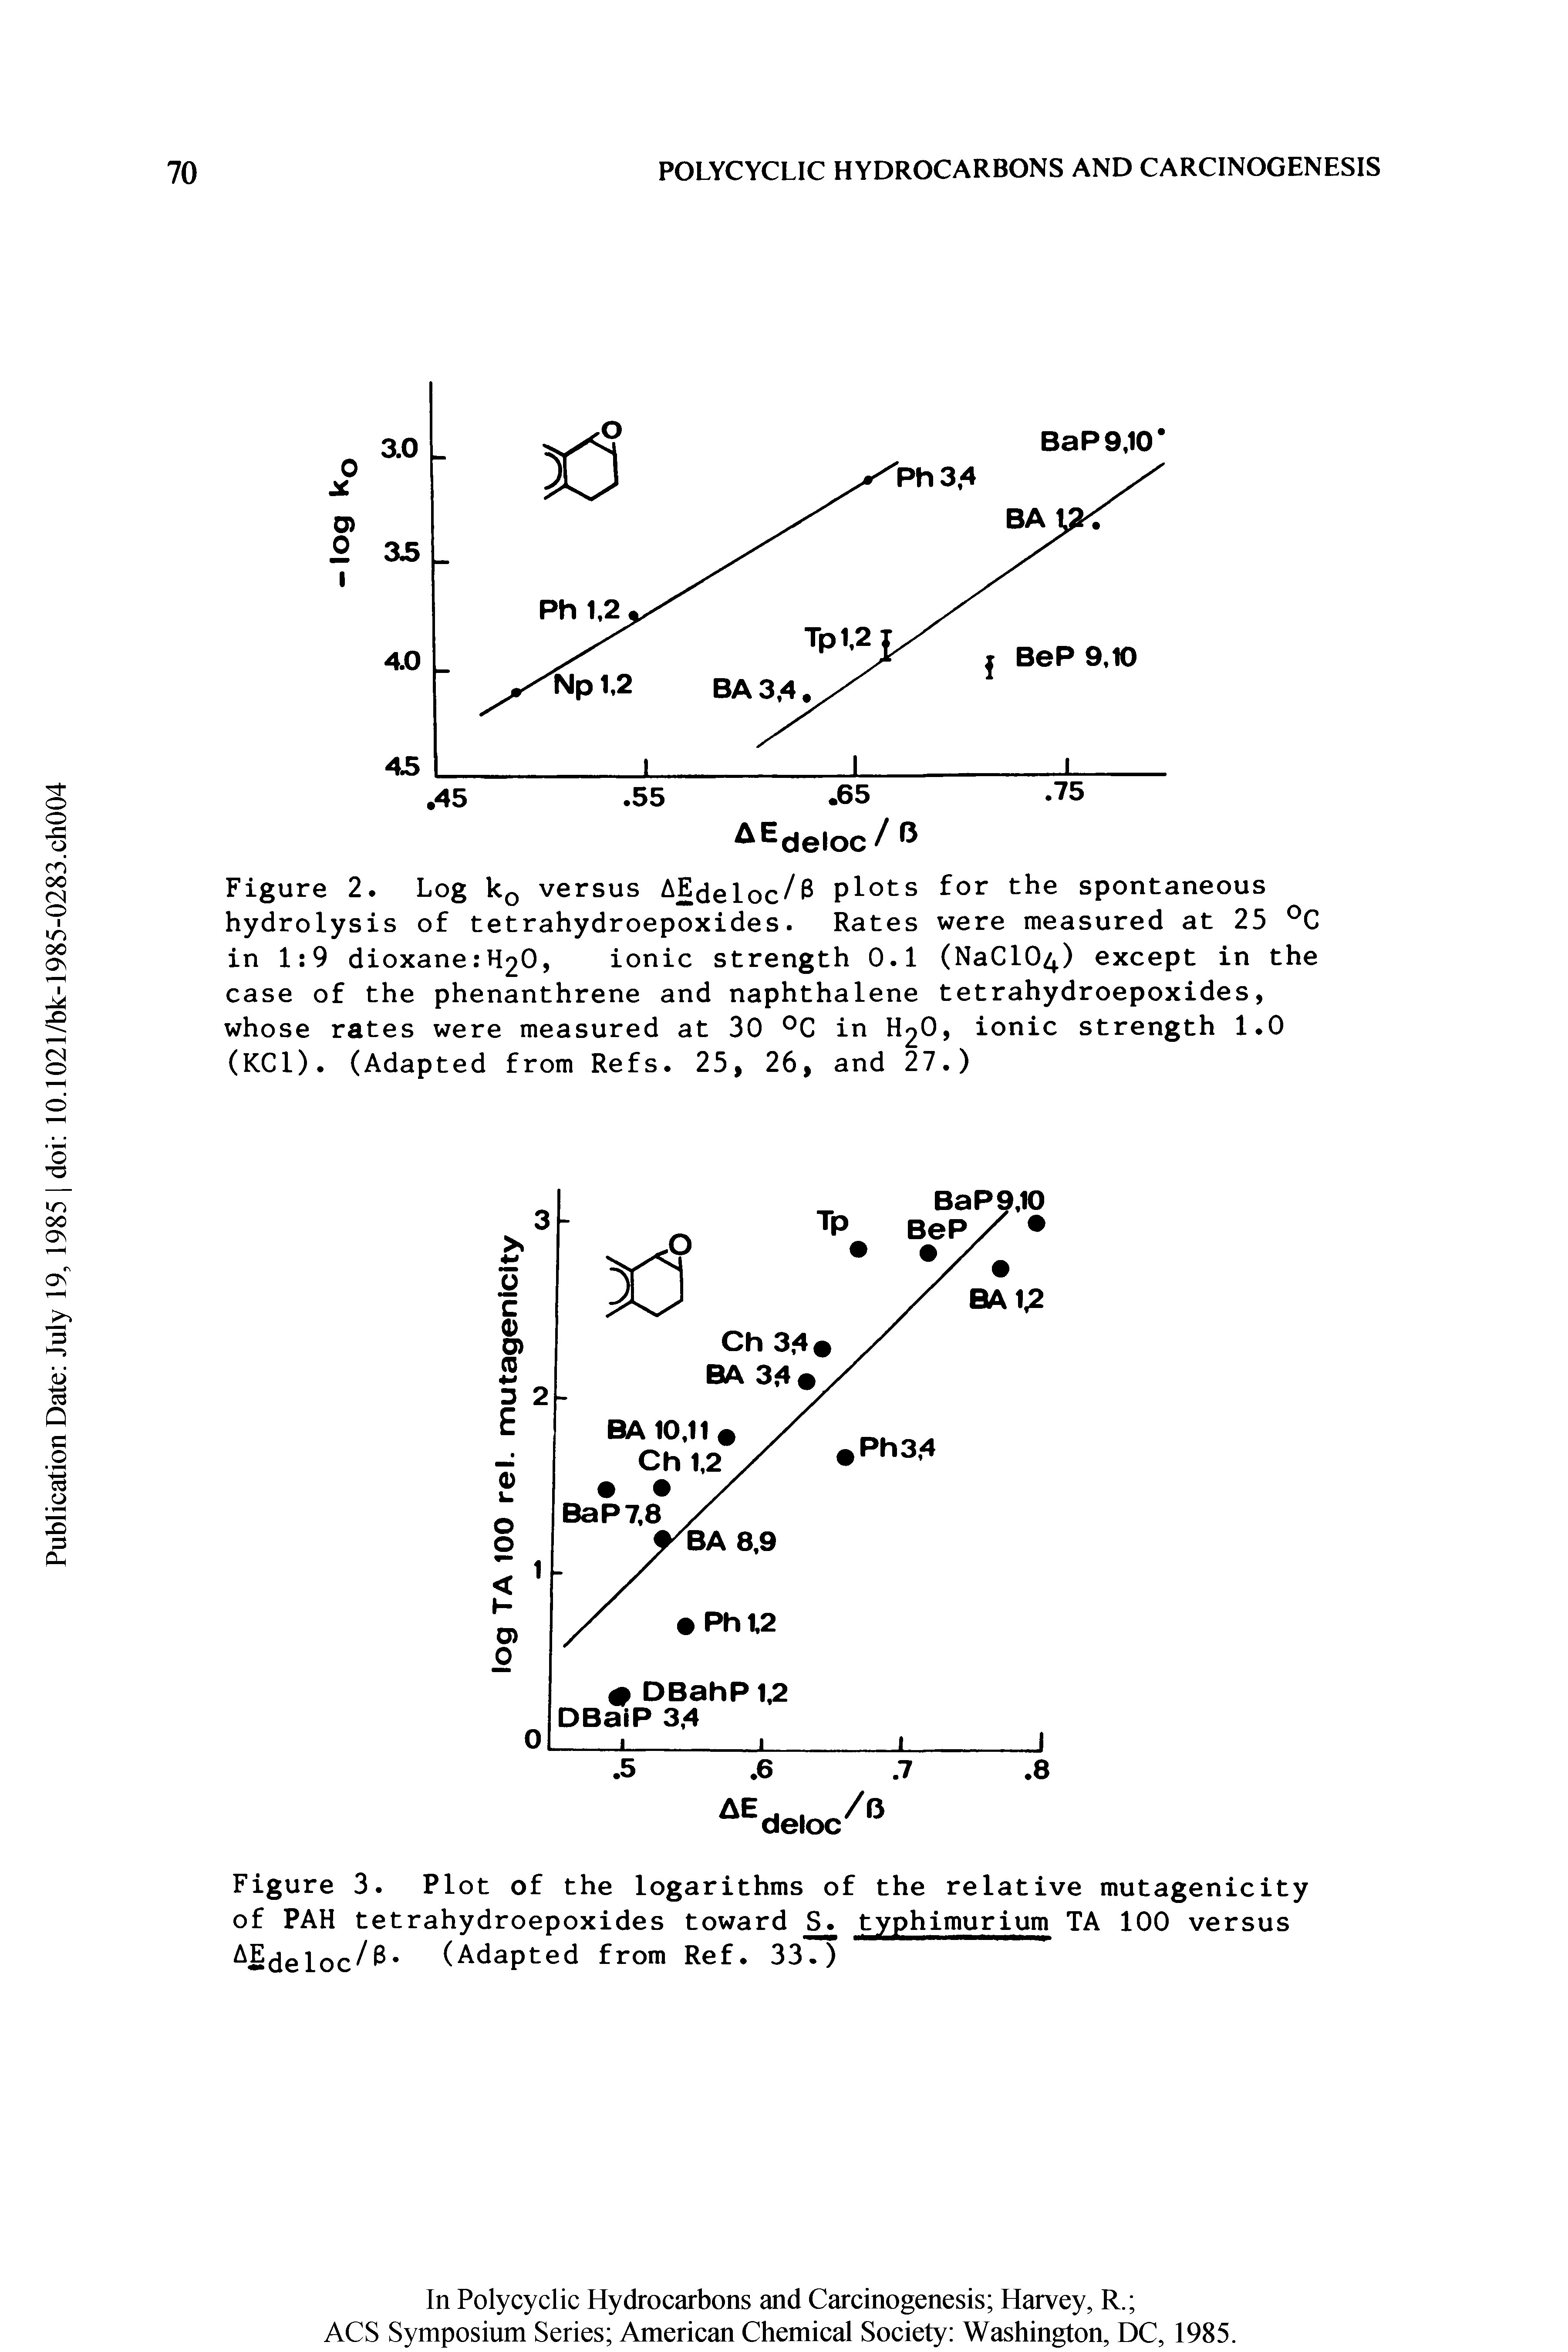 Figure 3. Plot of the logarithms of the relative mutagenicity of PAH tetrahydroepoxides toward typhimurium TA 100 versus AEdeloc/ (Adapted from Ref. 33.)...